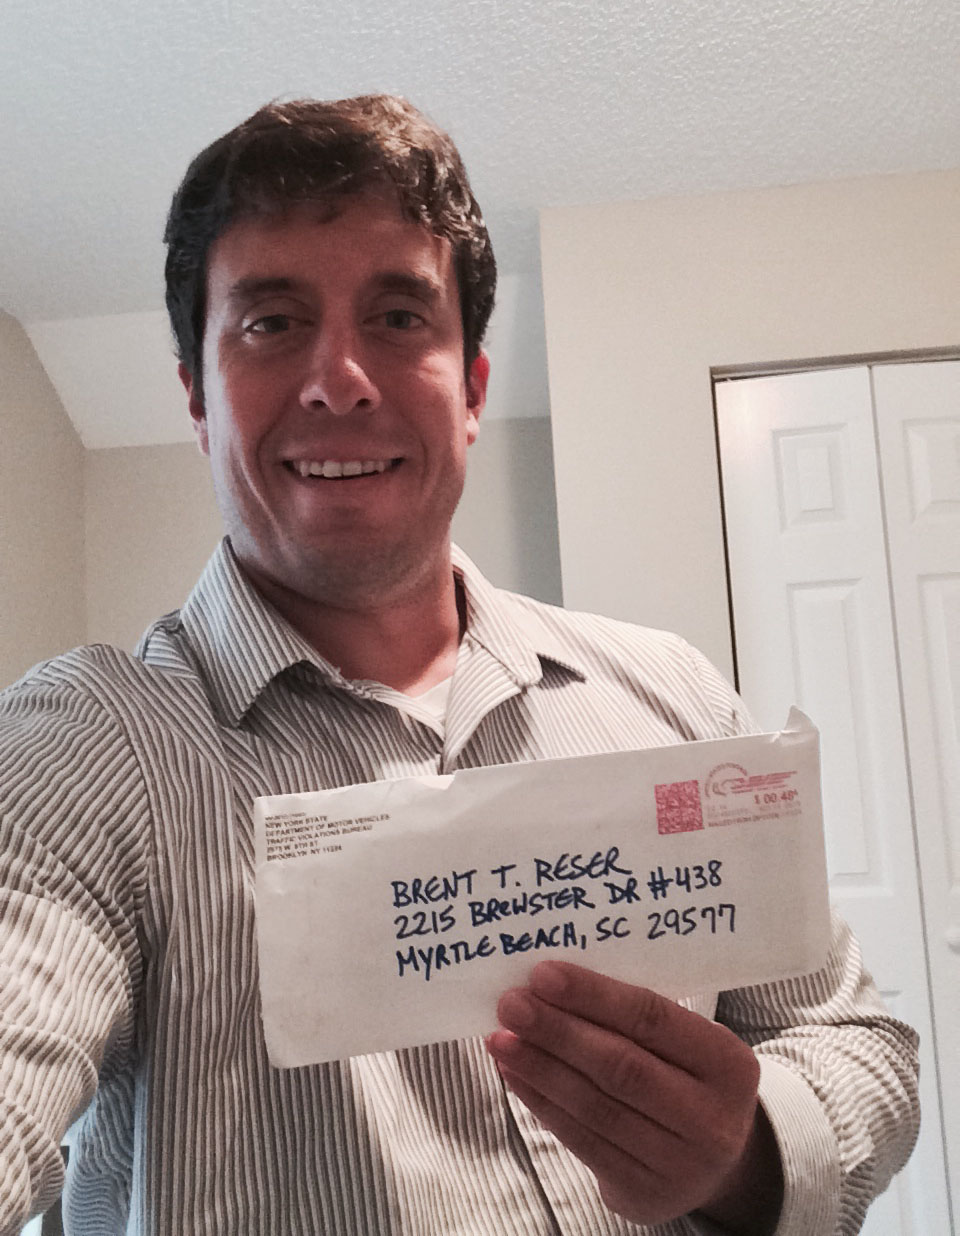 Although I am smiling while holding the envelope that contained the decision regarding my case from the New York State DMV, was it in fact a favorable one?